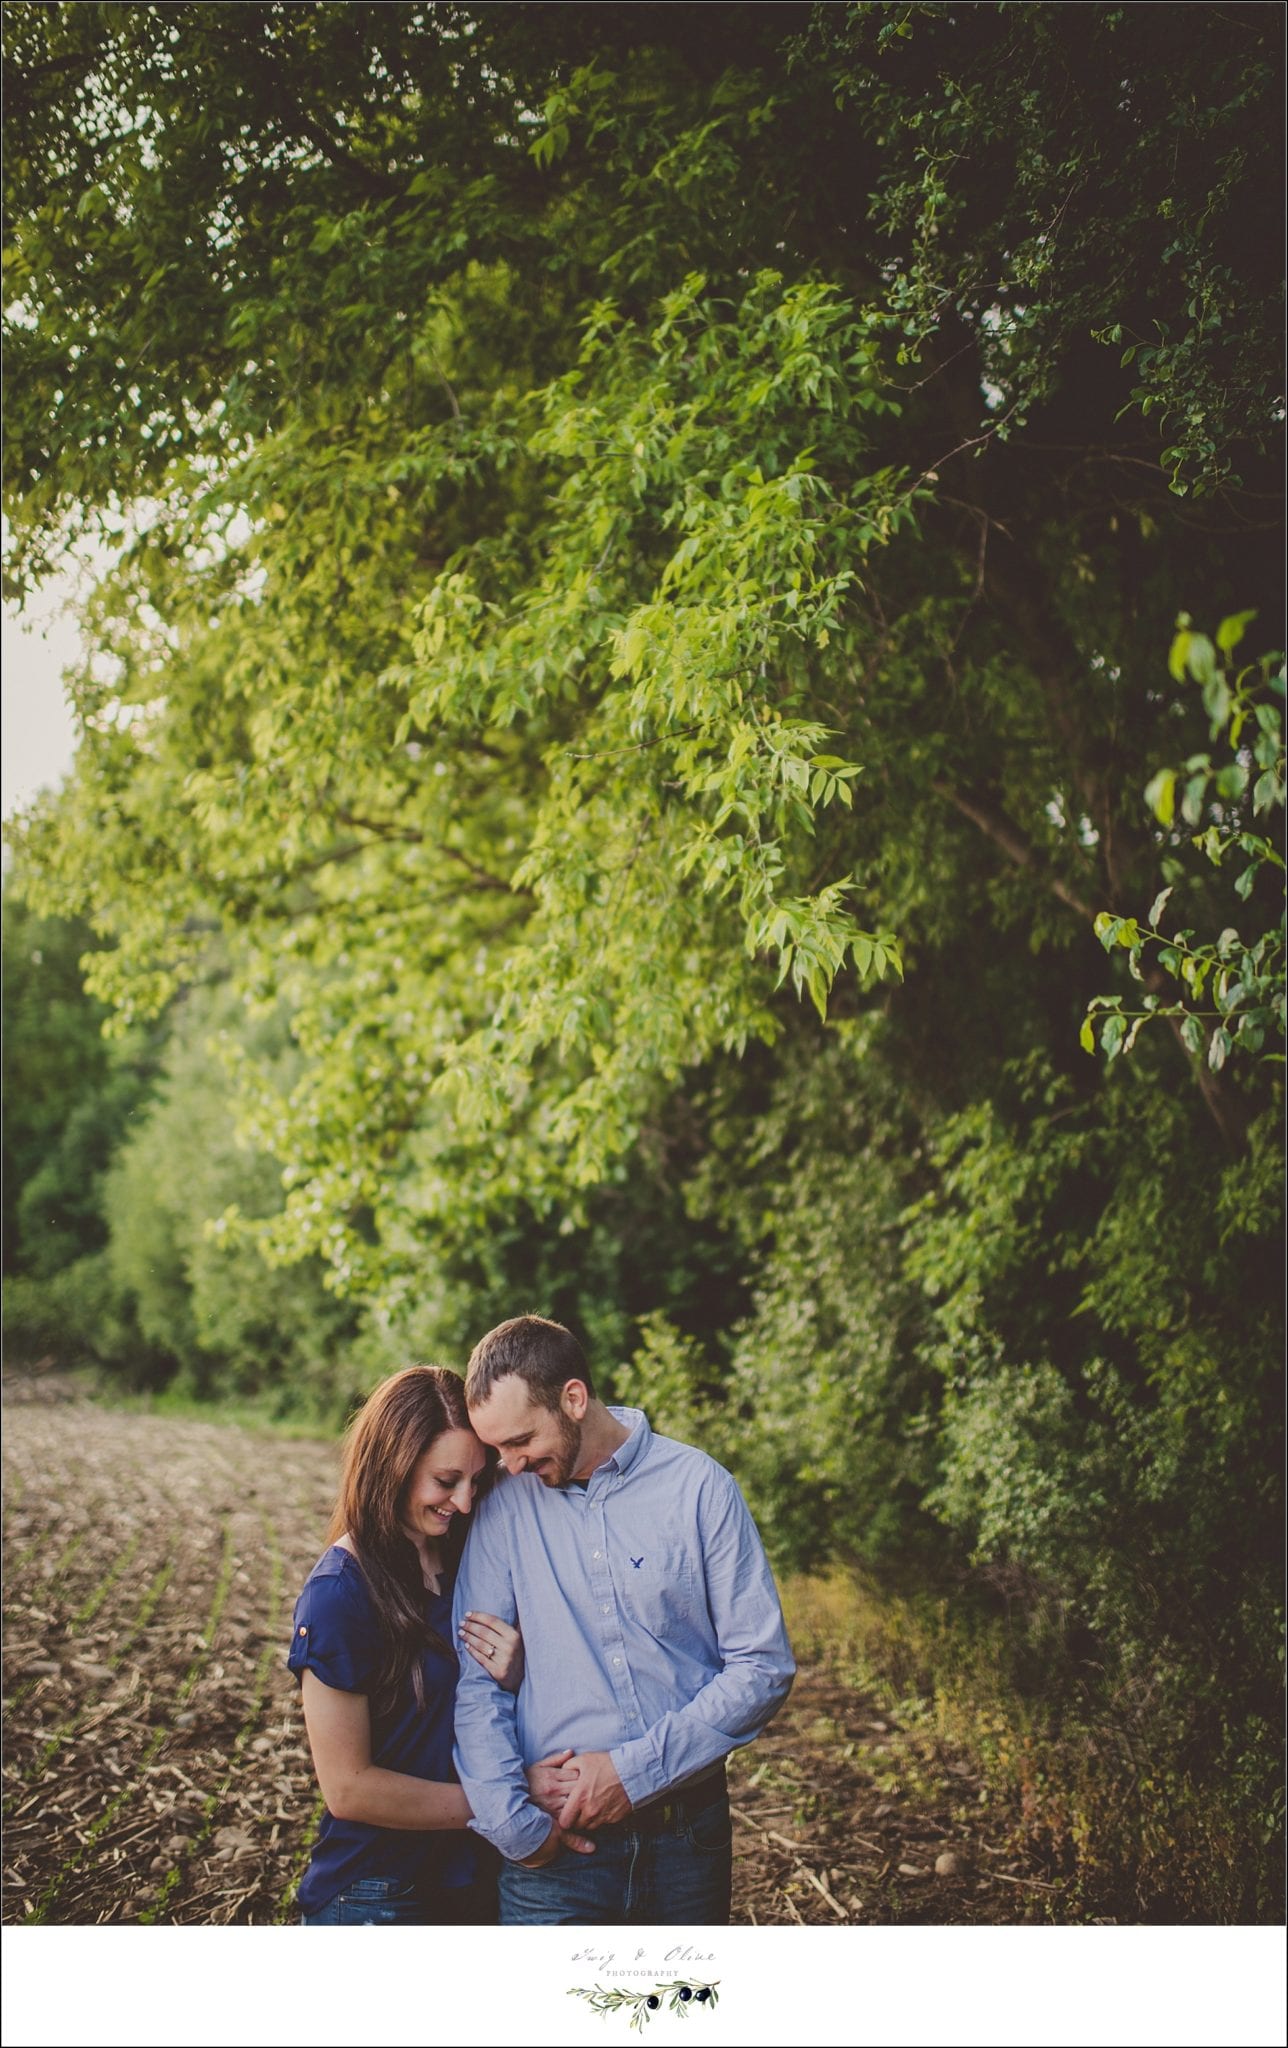 engagements, happy couples, happy dogs, puppies, pets, outdoor sessions, rustic manor, Deerfield WI, trees, TOP engagement sessions, handholding, sunset sessions, Twig and Olive photography, love, delectable, fun, black and white, Deerfield backdrop, flowers, pasture, outdoors, dogs are people too, Twig and Olive, Photography, Madison area, Dane county, Twig and Olive engagement sessions, pet sessions, Dane County Photography